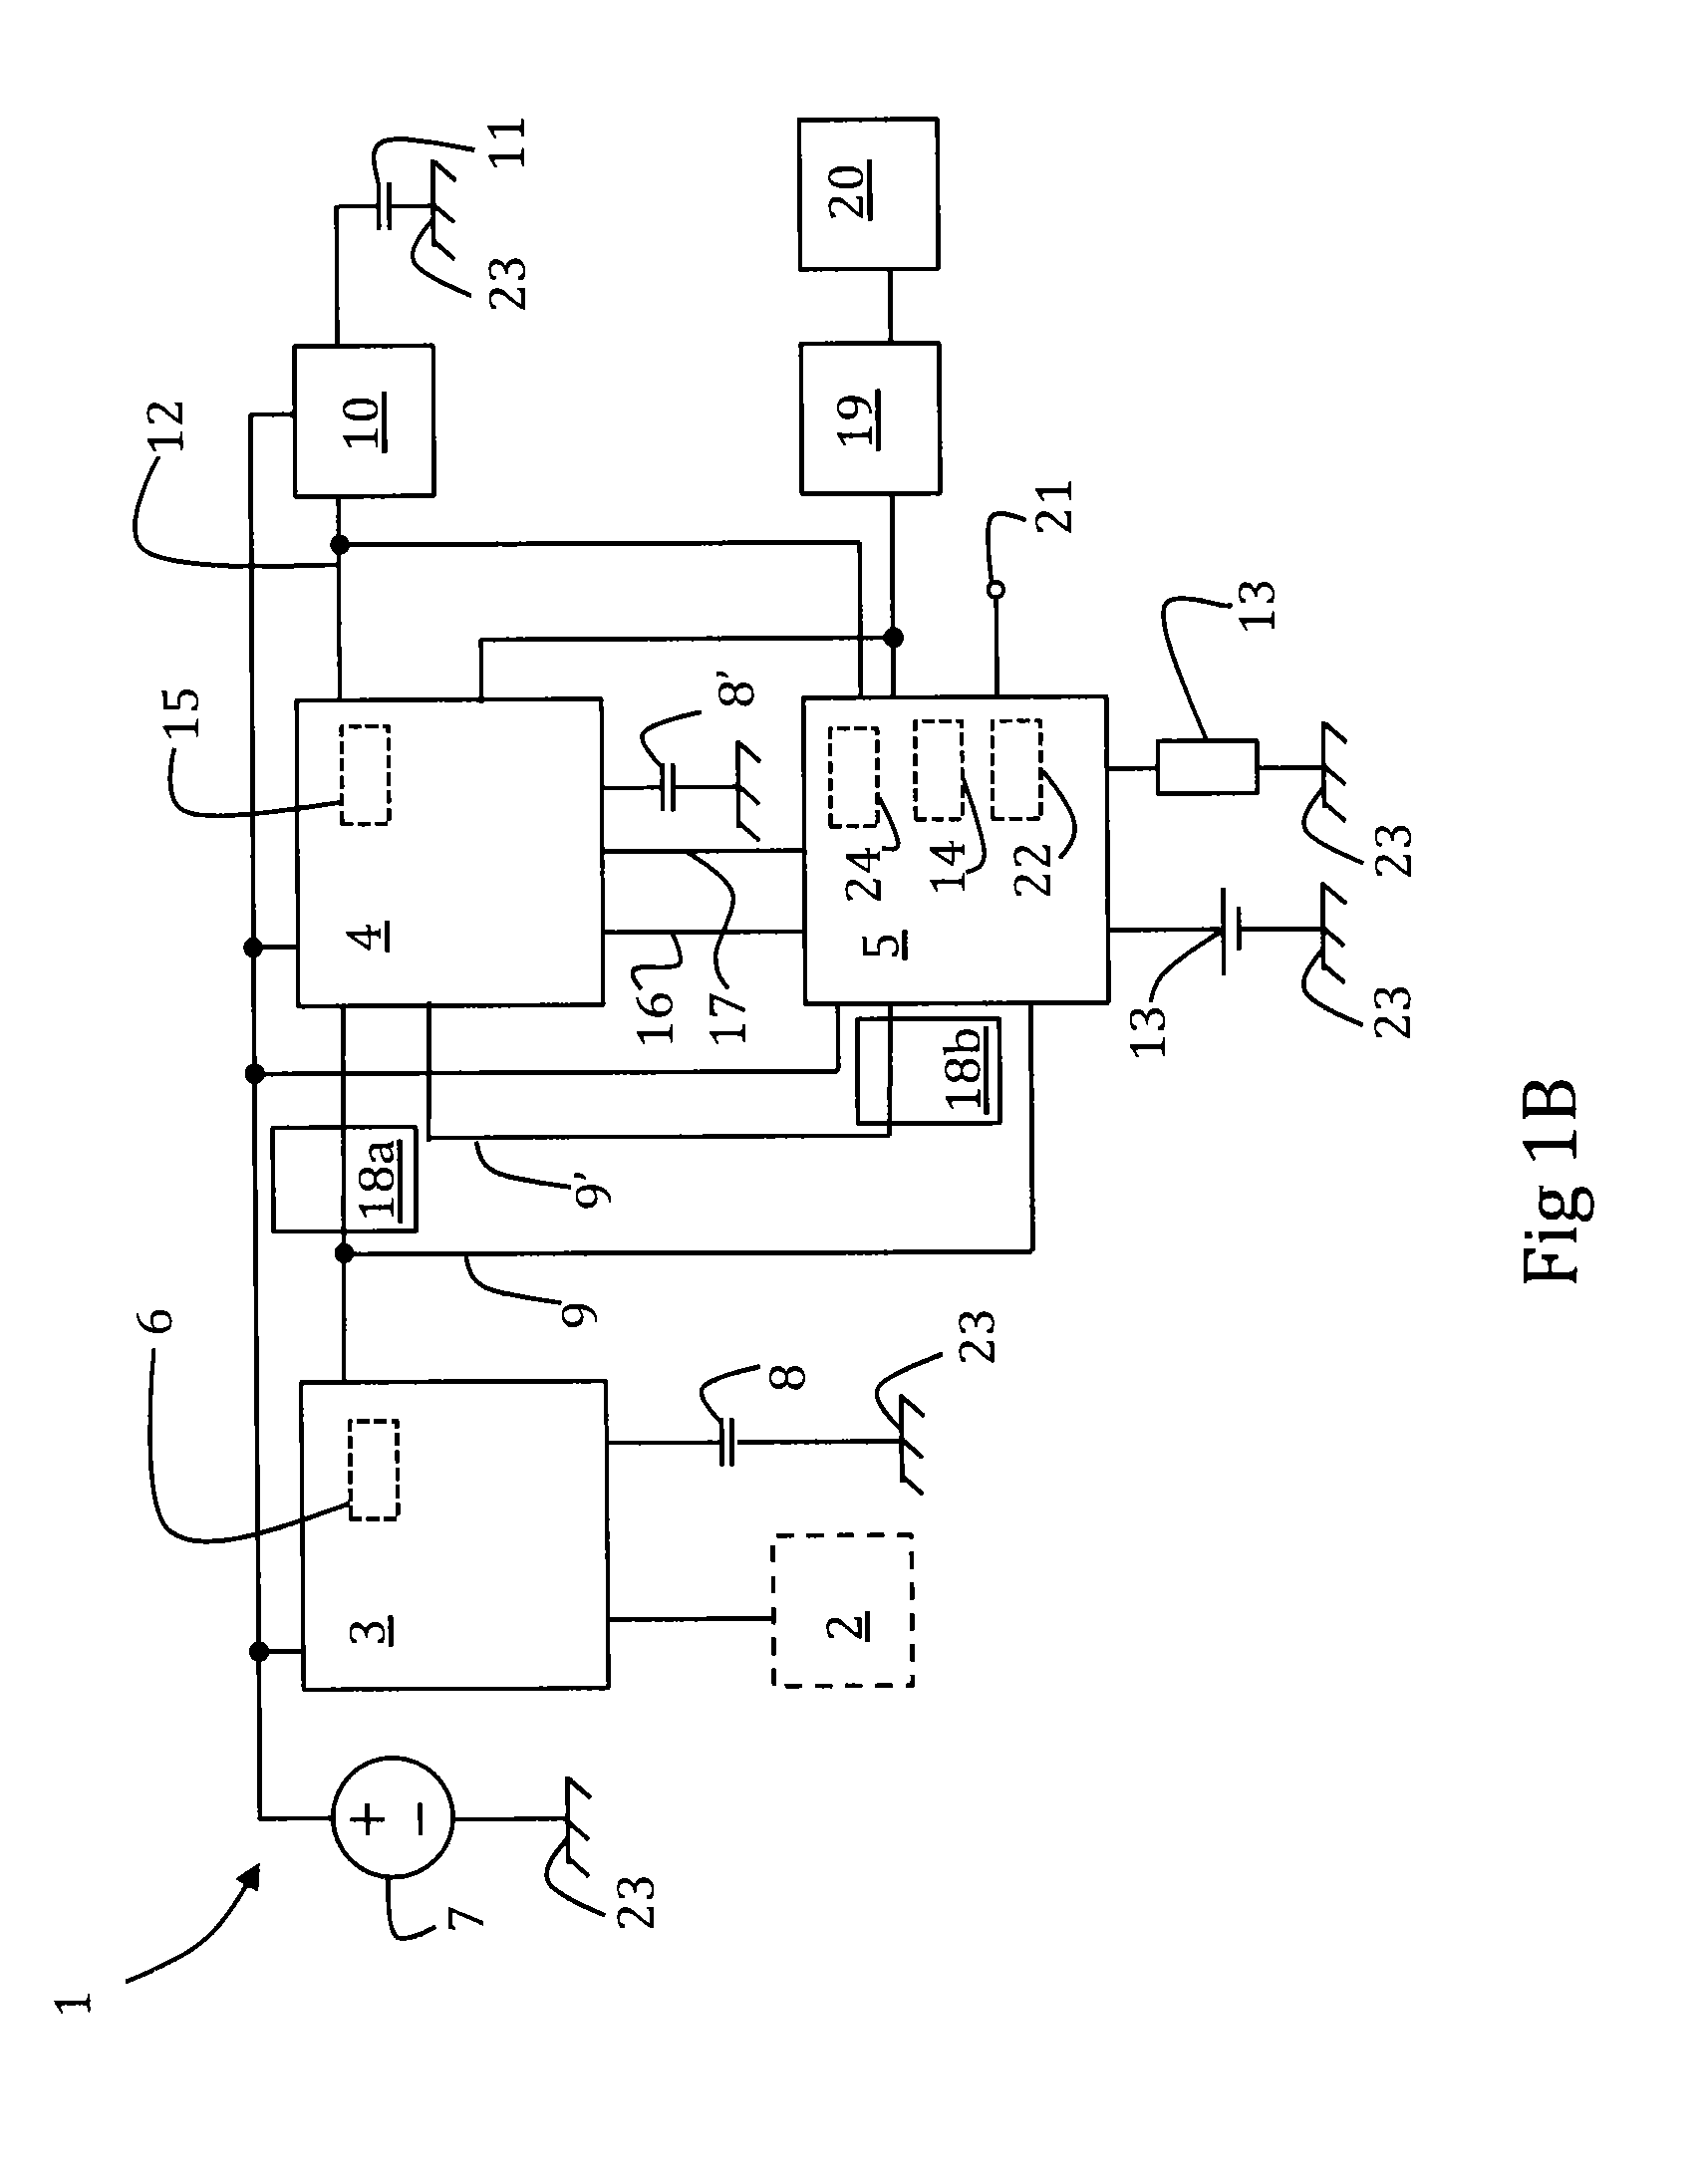 Trip cause management device for an electronic trip device